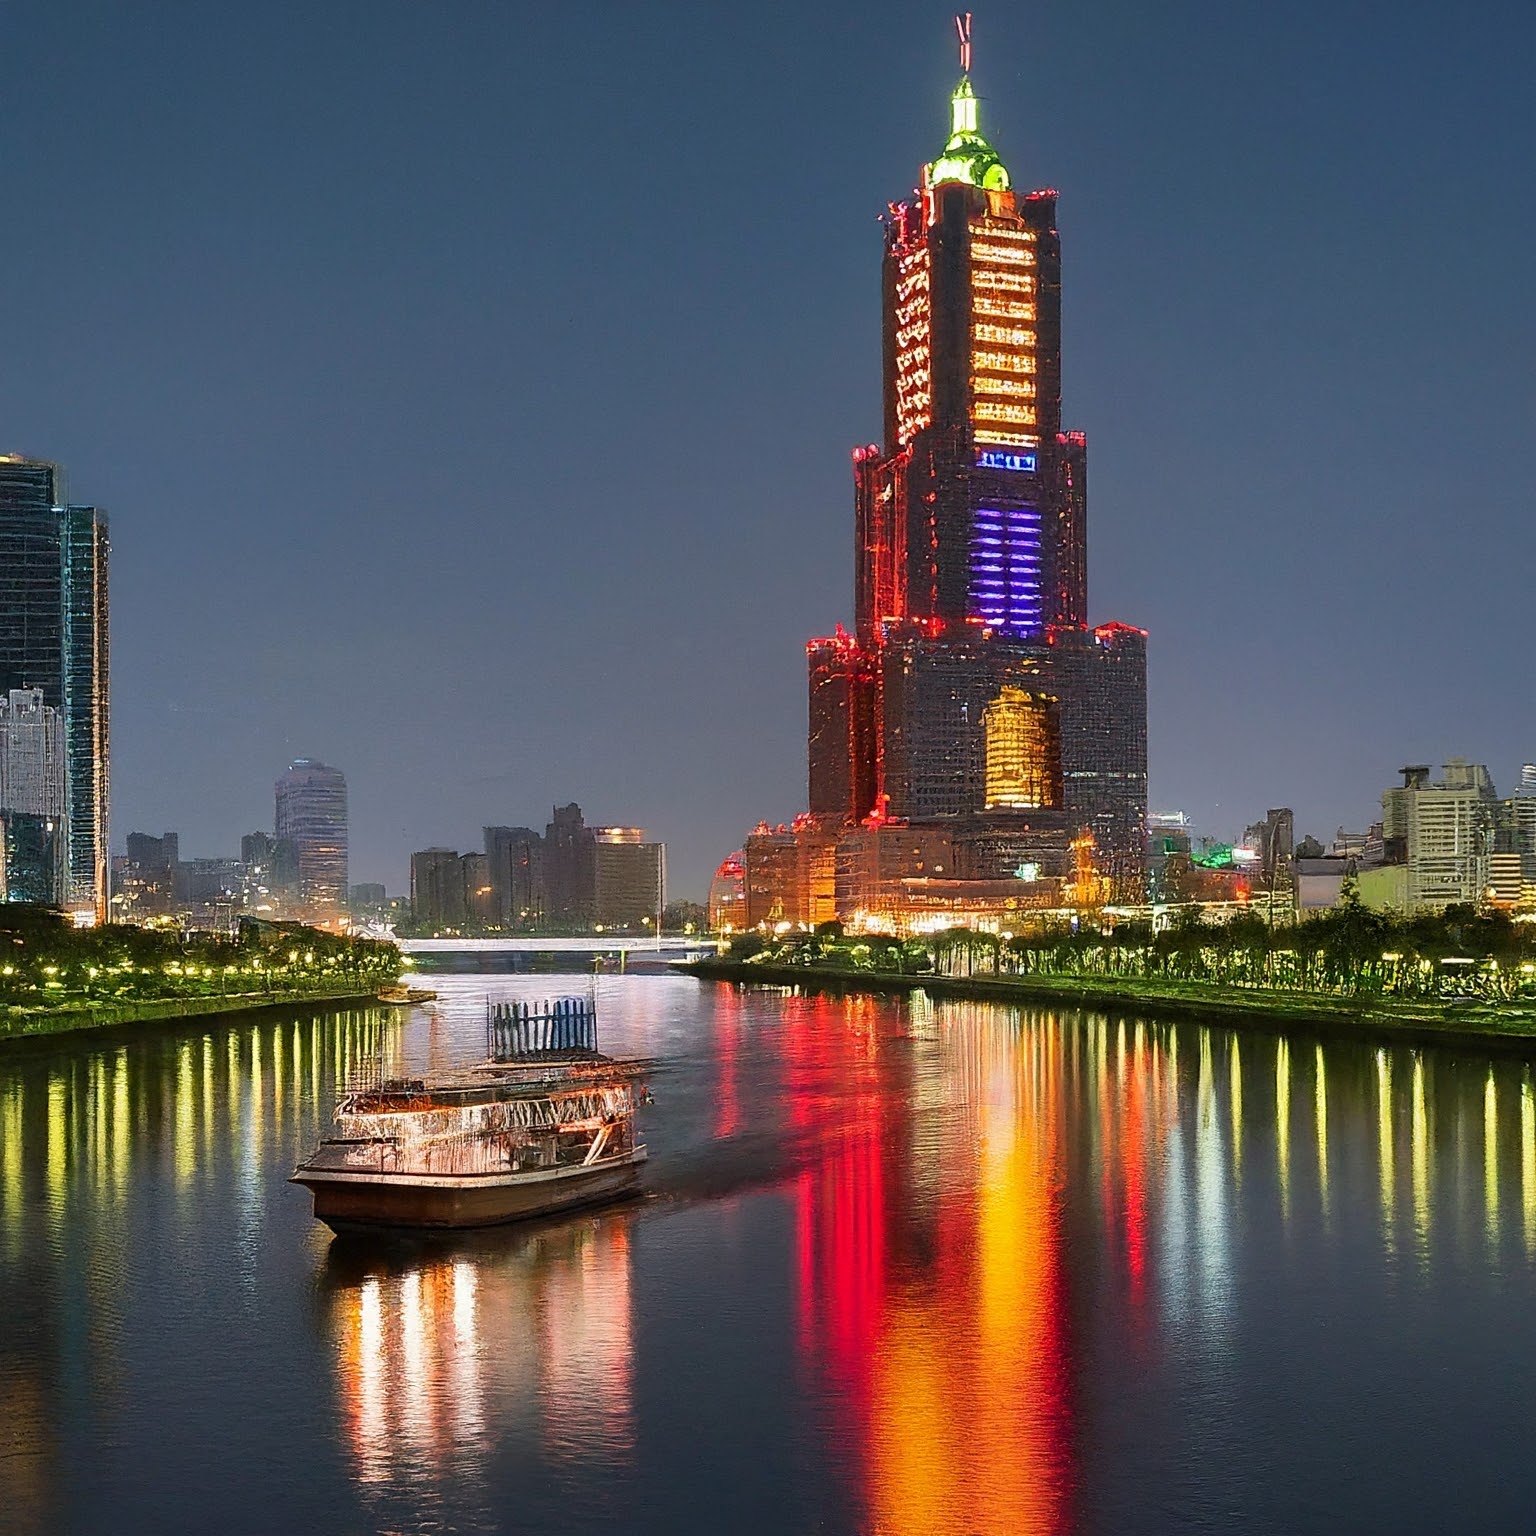 Romantic evening cruise on Love River, Kaohsiung, Taiwan, with city lights.